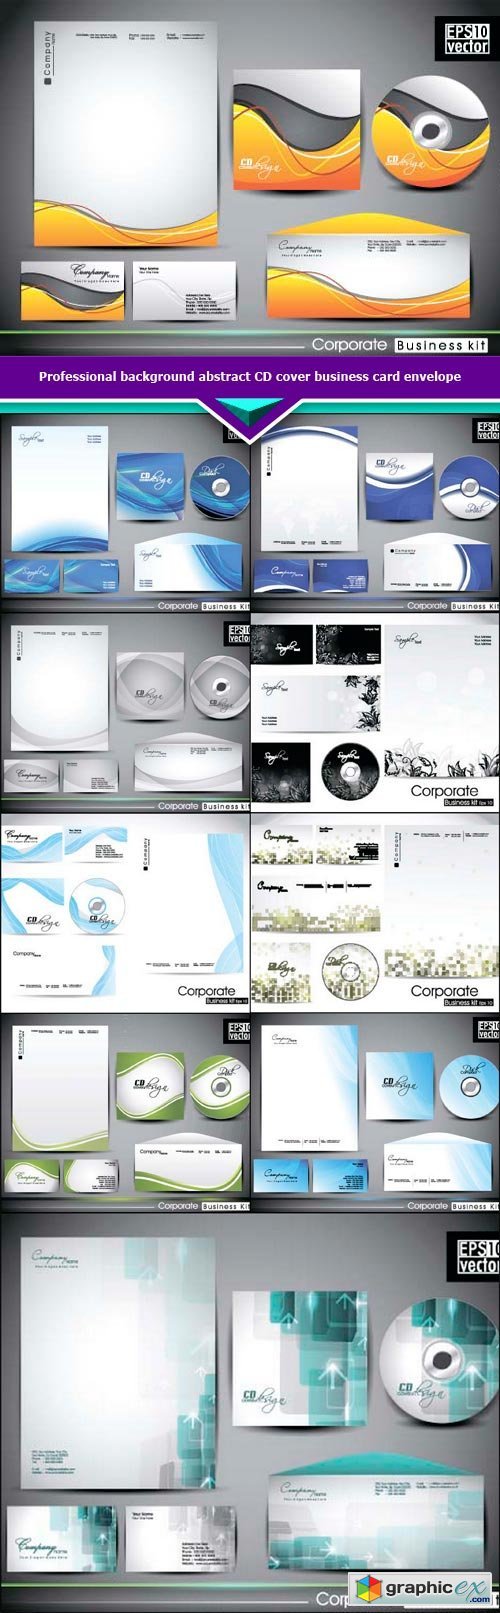 Professional background abstract CD cover business card envelope 10x EPS